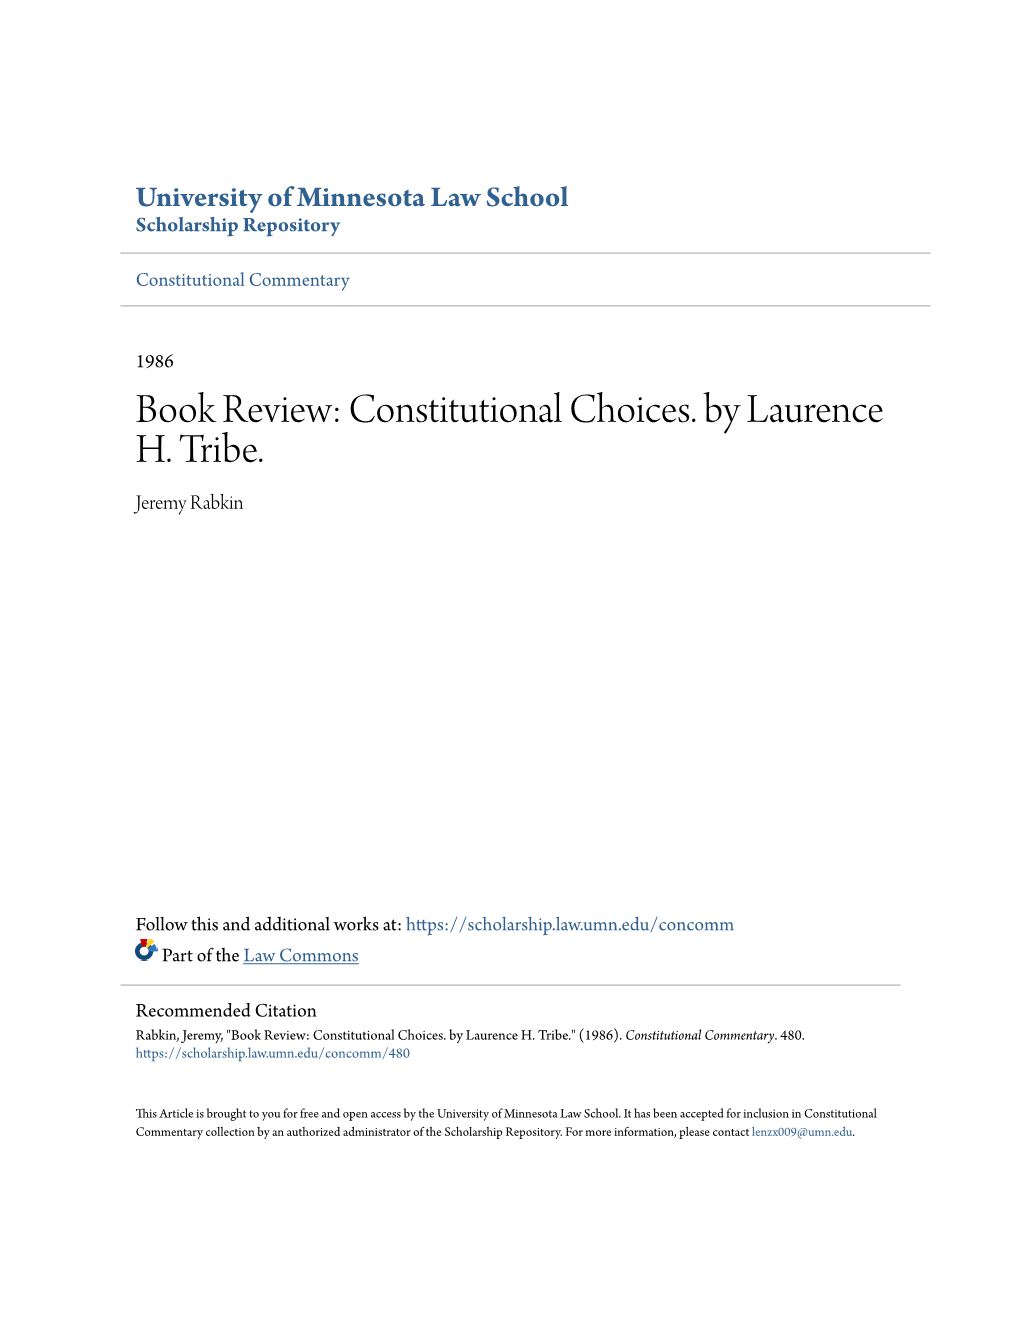 Constitutional Choices. by Laurence H. Tribe. Jeremy Rabkin